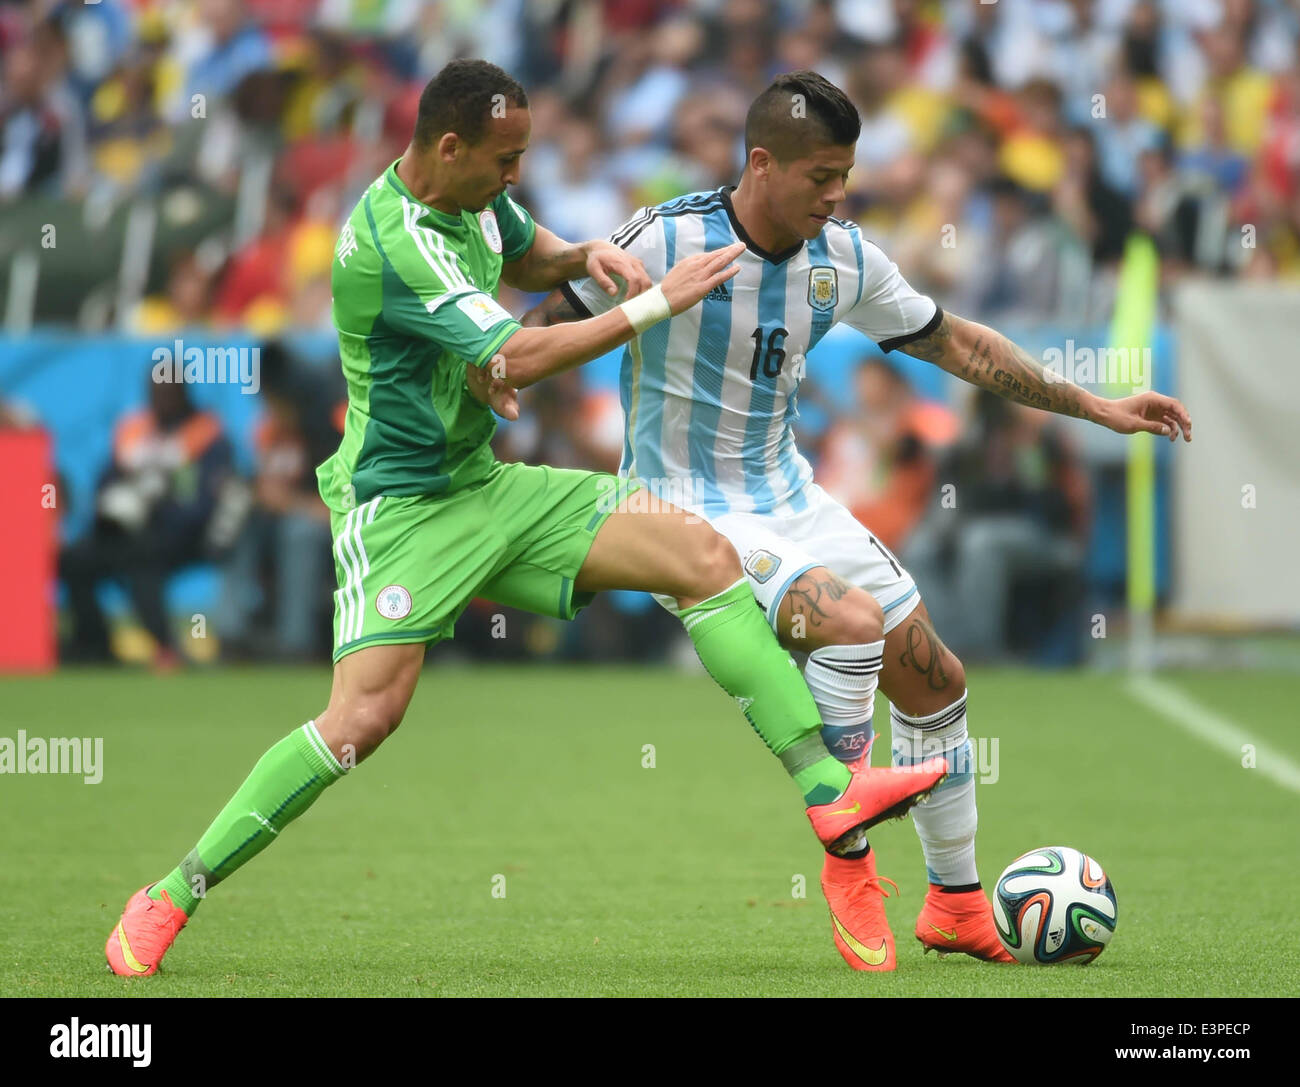 Porto Alegre, Brazil. 25th June, 2014. Argentina's Marcos Rojo (R) vies with Nigeria's Peter Osaze Odemwingie during a Group F match between Nigeria and Argentina of 2014 FIFA World Cup at the Estadio Beira-Rio Stadium in Porto Alegre, Brazil, on June 25, 2014. © Li Ga/Xinhua/Alamy Live News Stock Photo